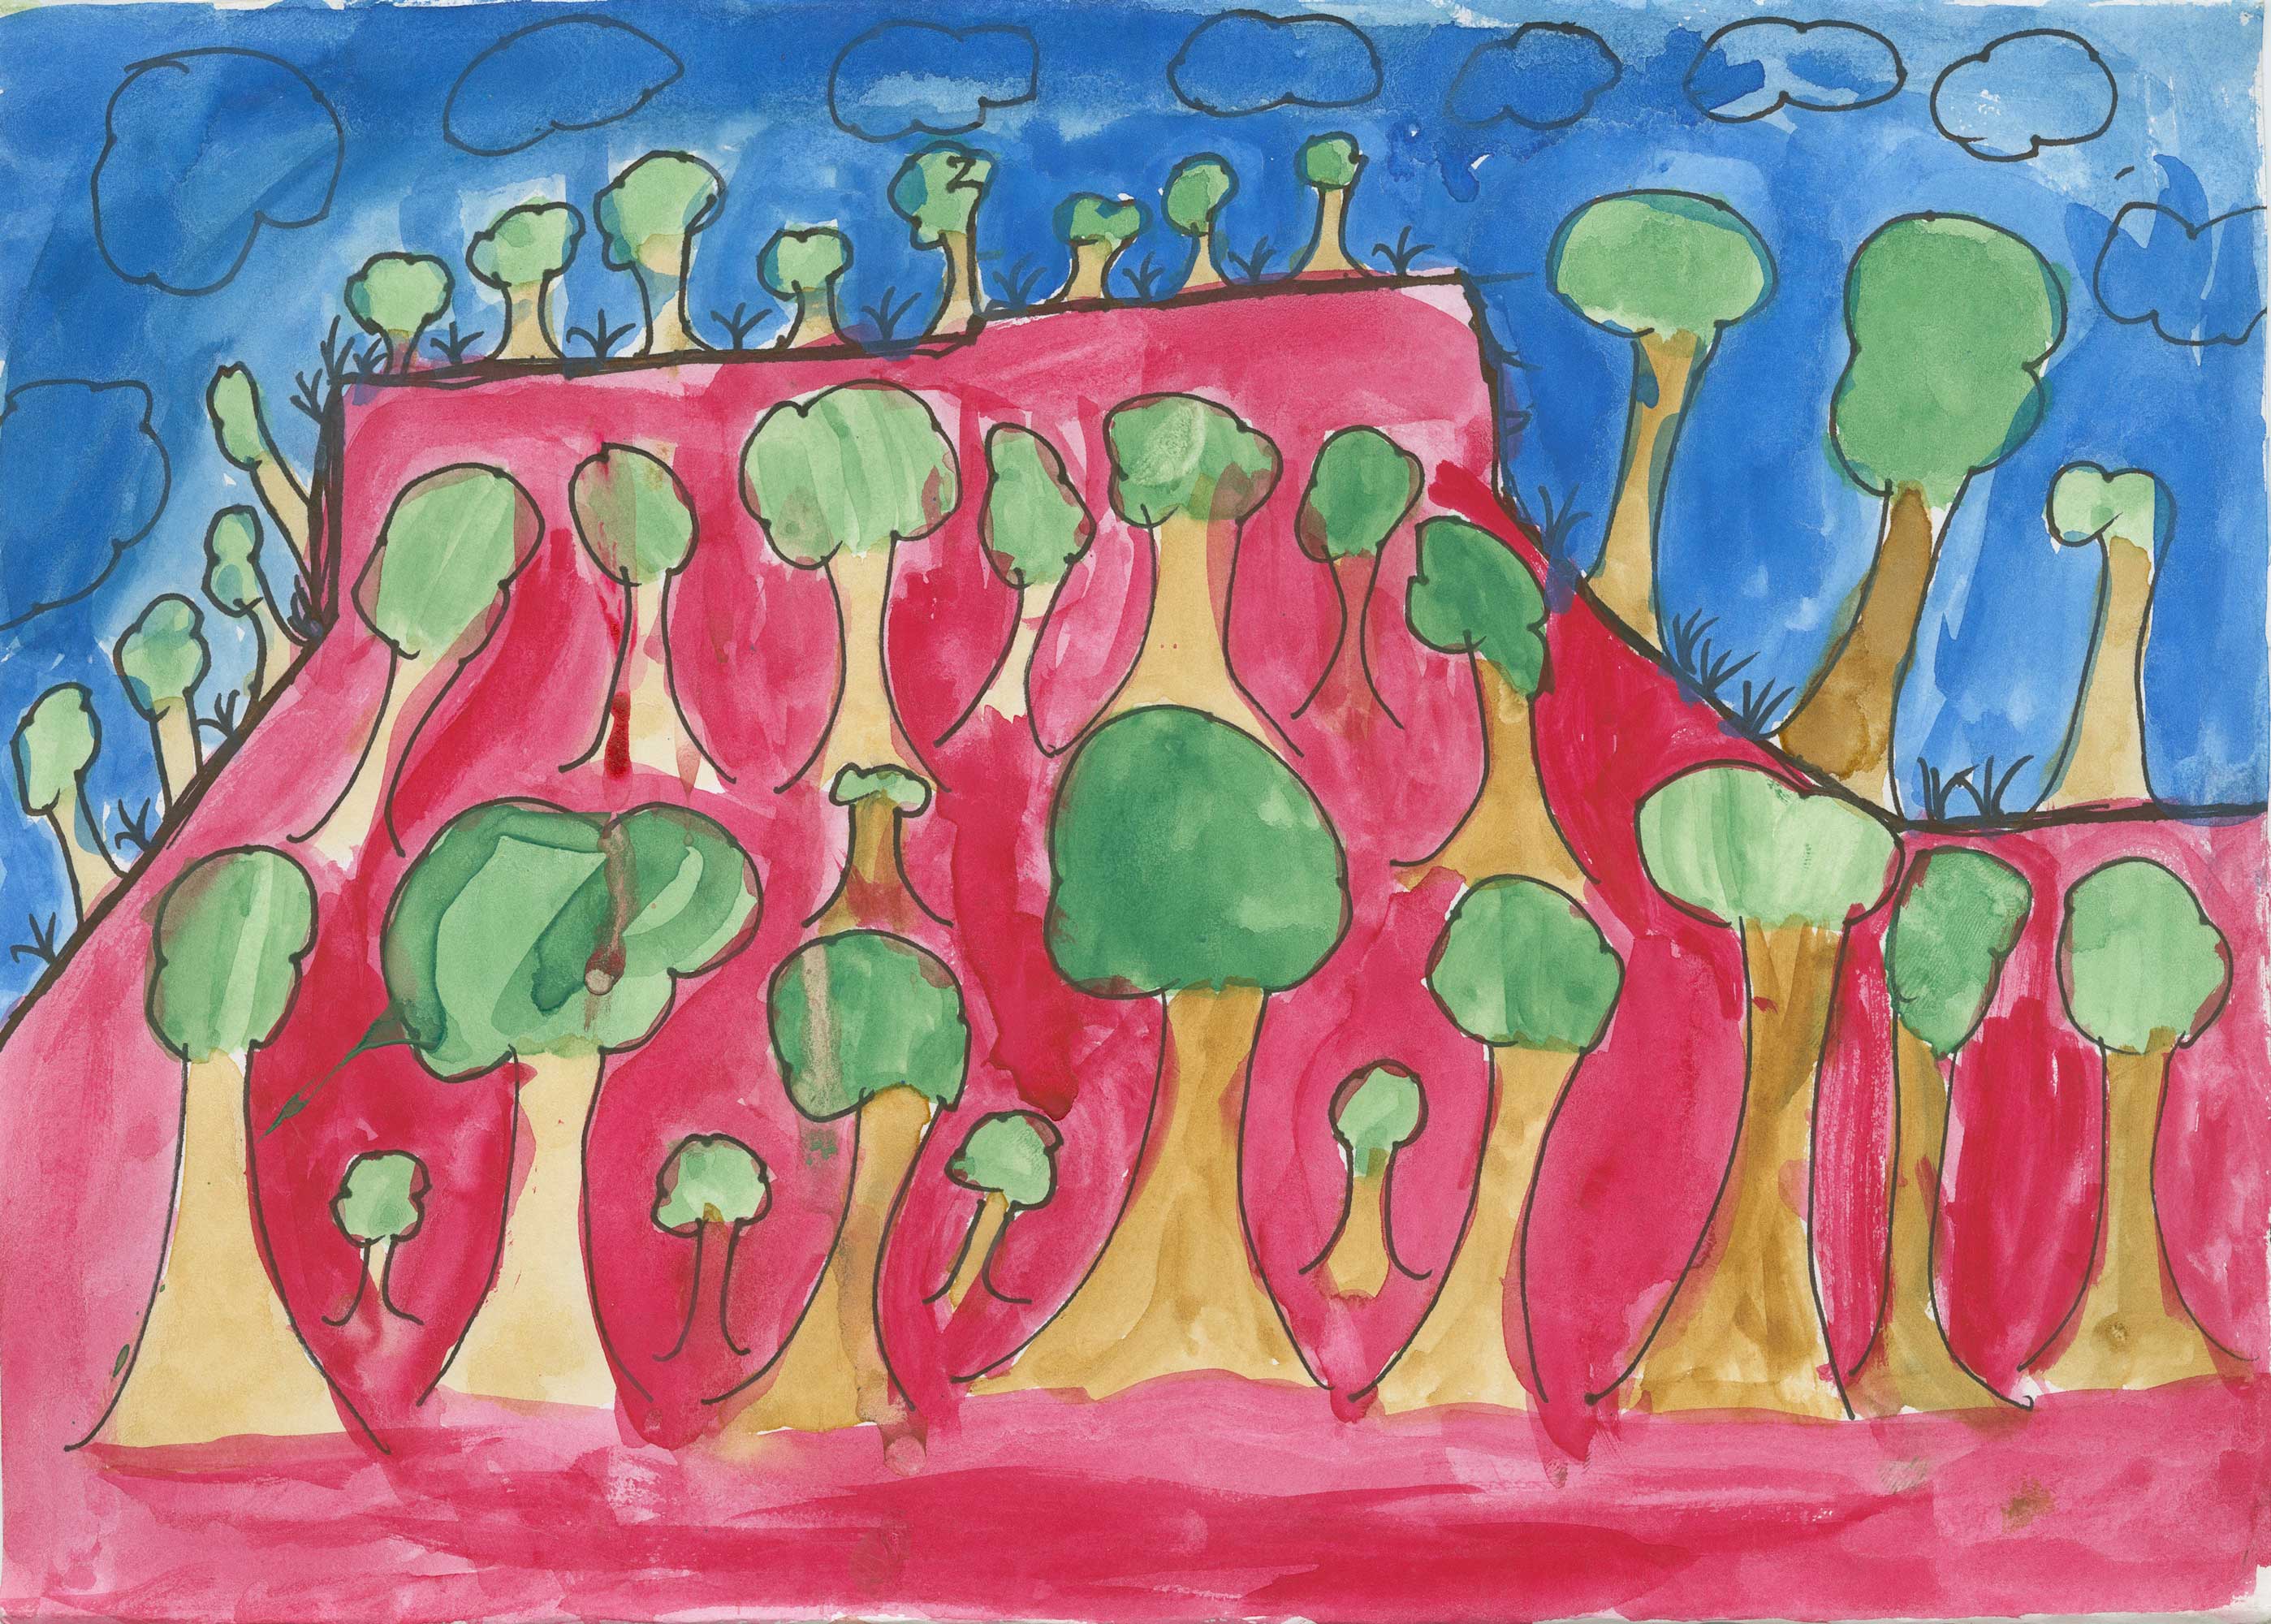 Child's artwork of trees with a virbrant colour.